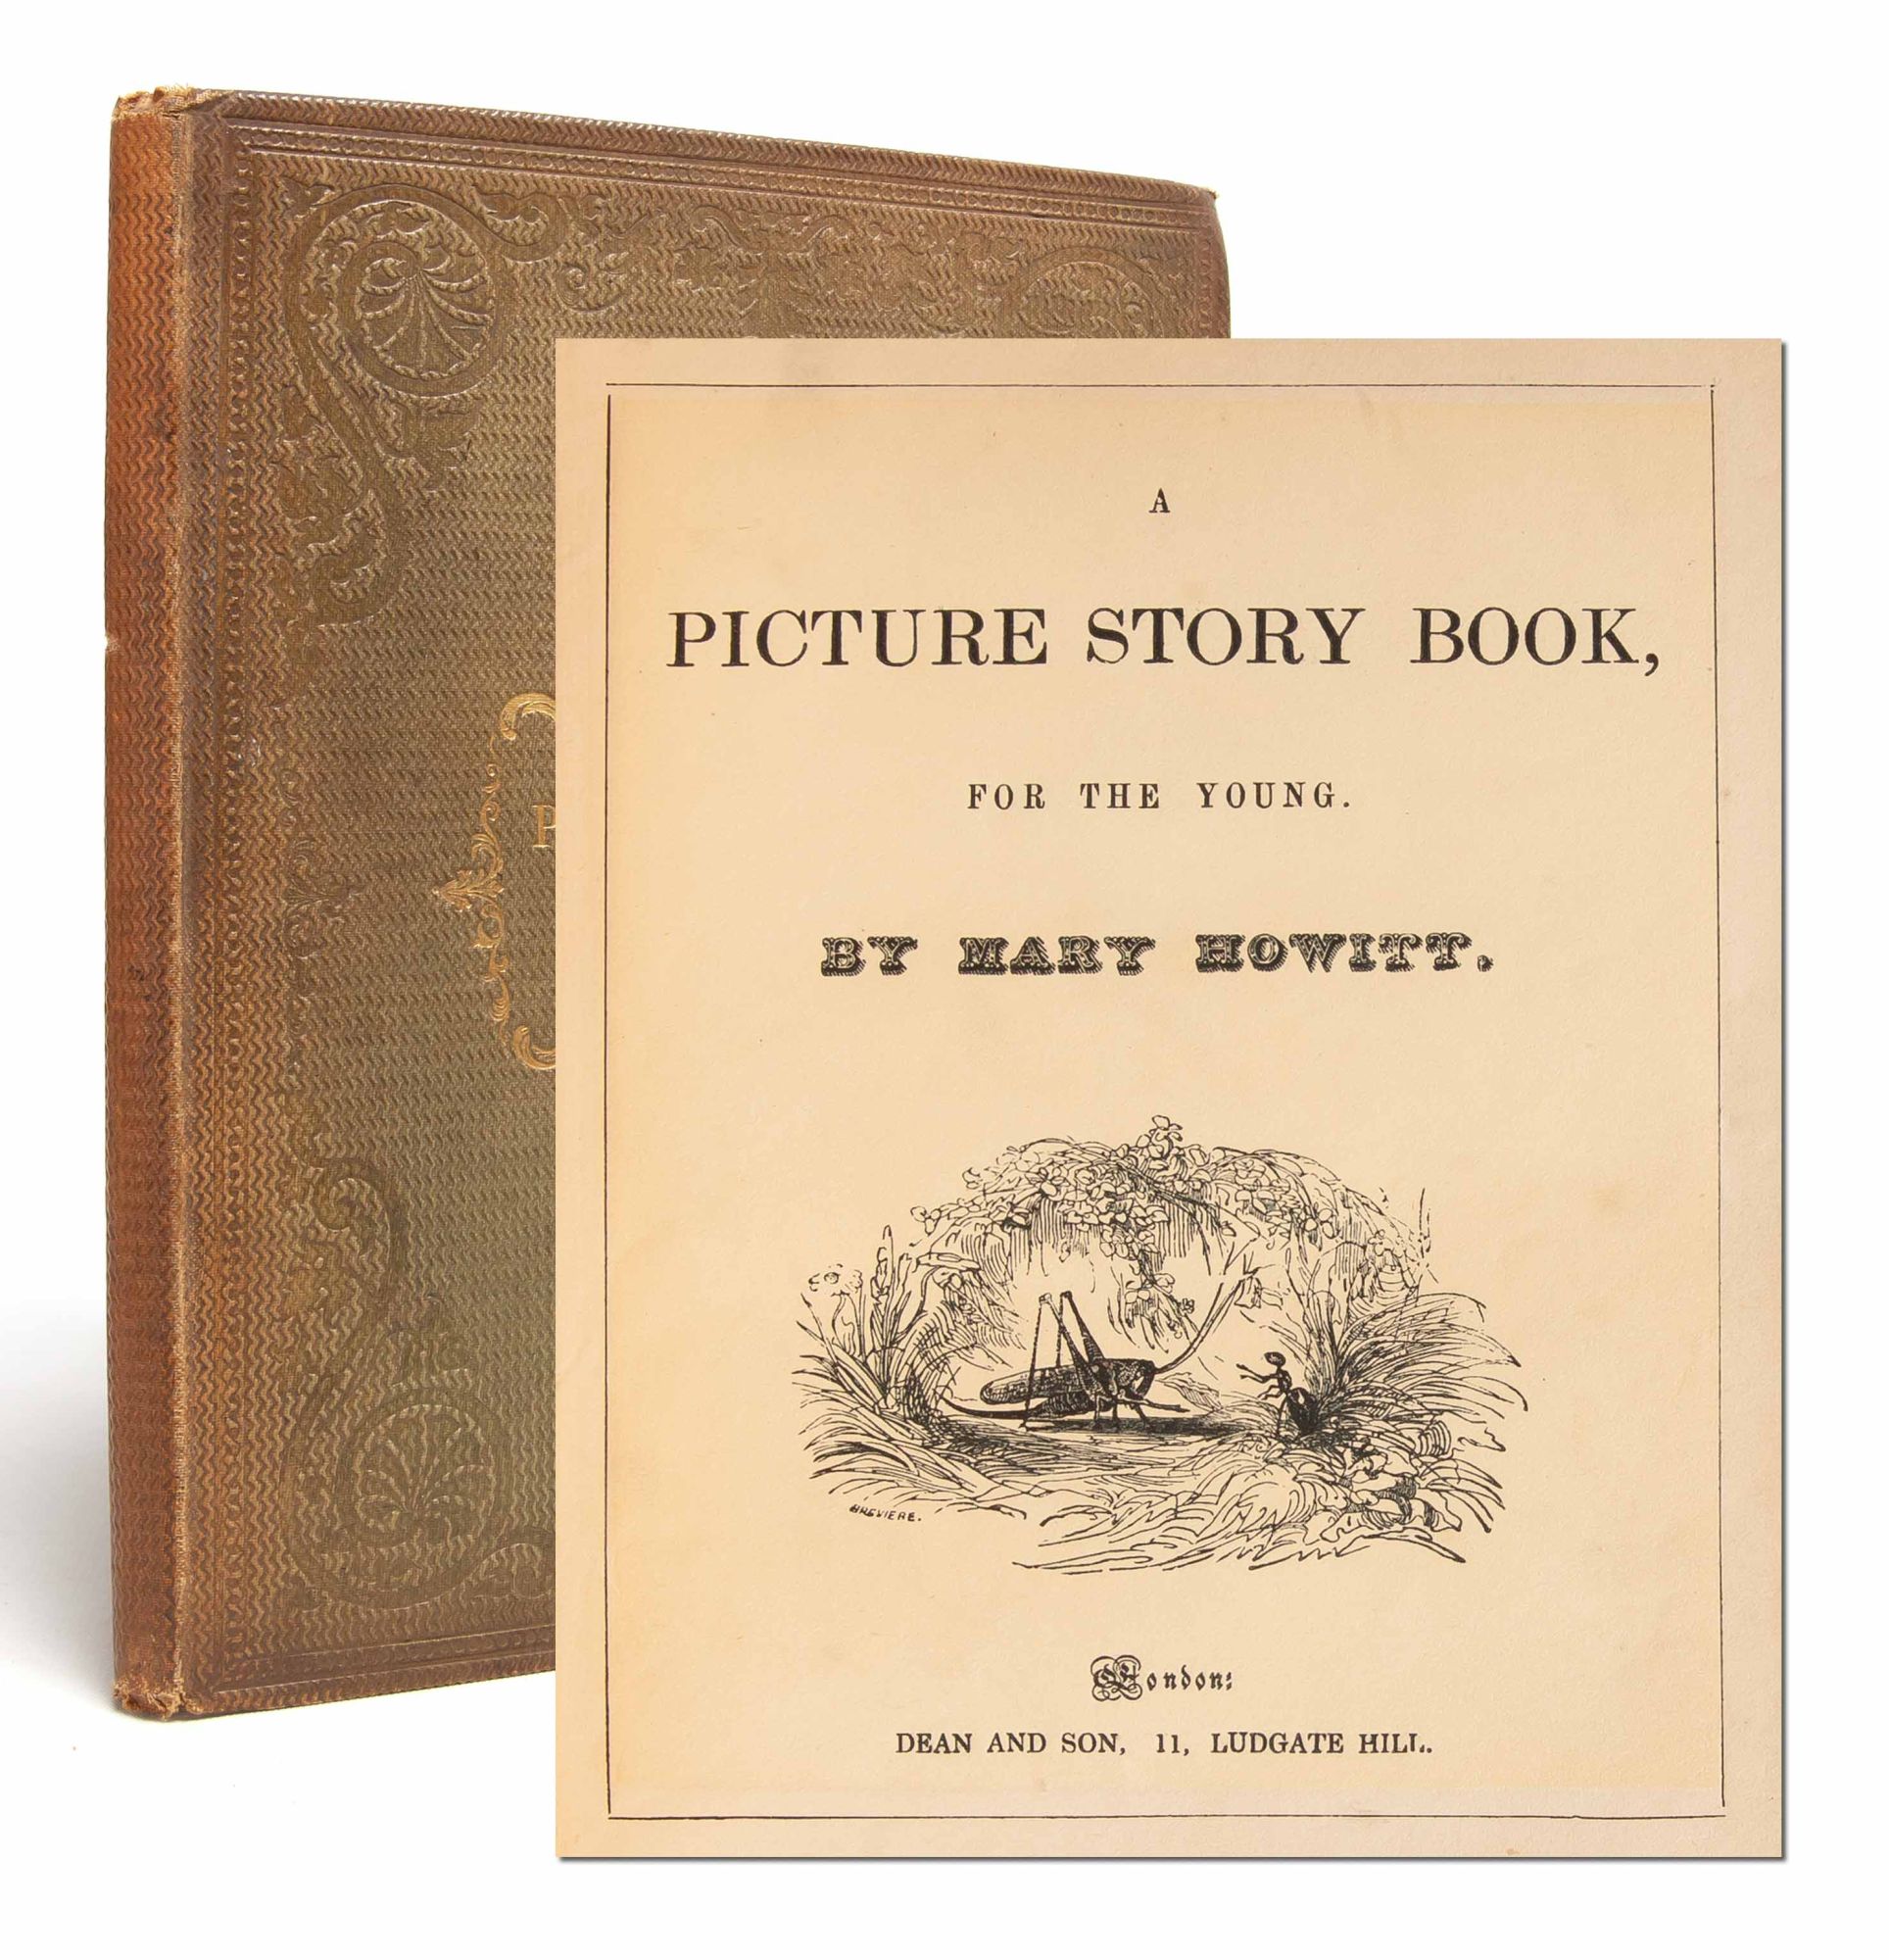 (Item #5745) A Picture Story Book for the Young. Mary Howitt.